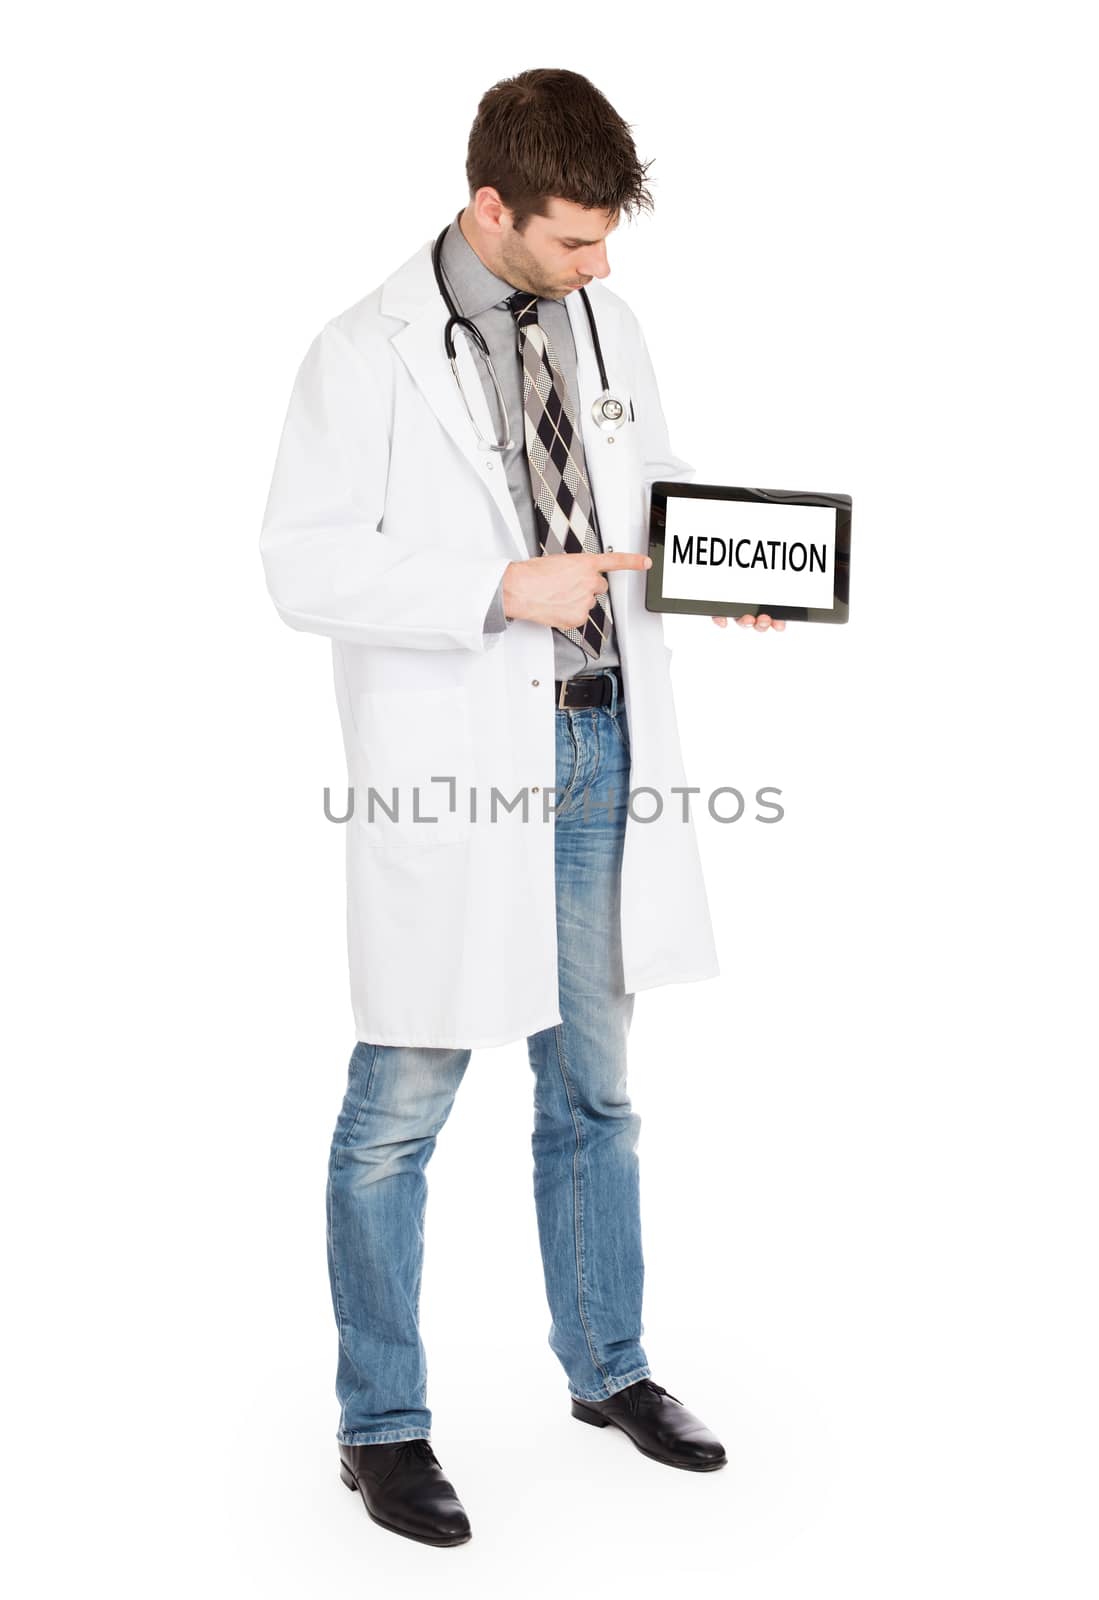 Doctor holding tablet - Medication by michaklootwijk